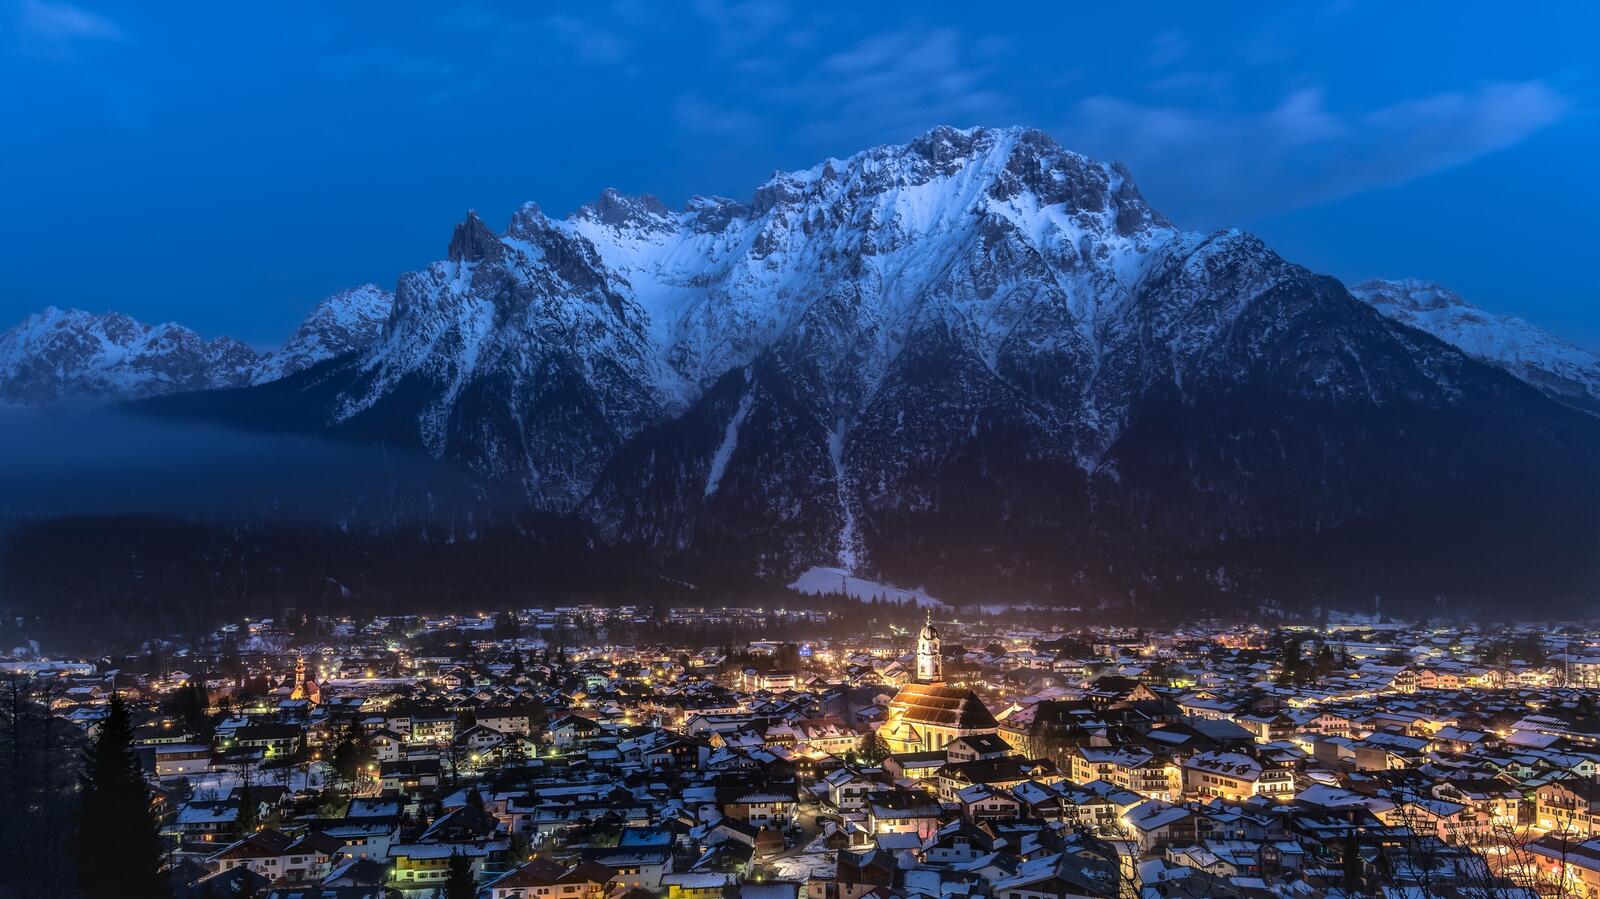 Wallpapers Mittenwald Germany mountain on the desktop